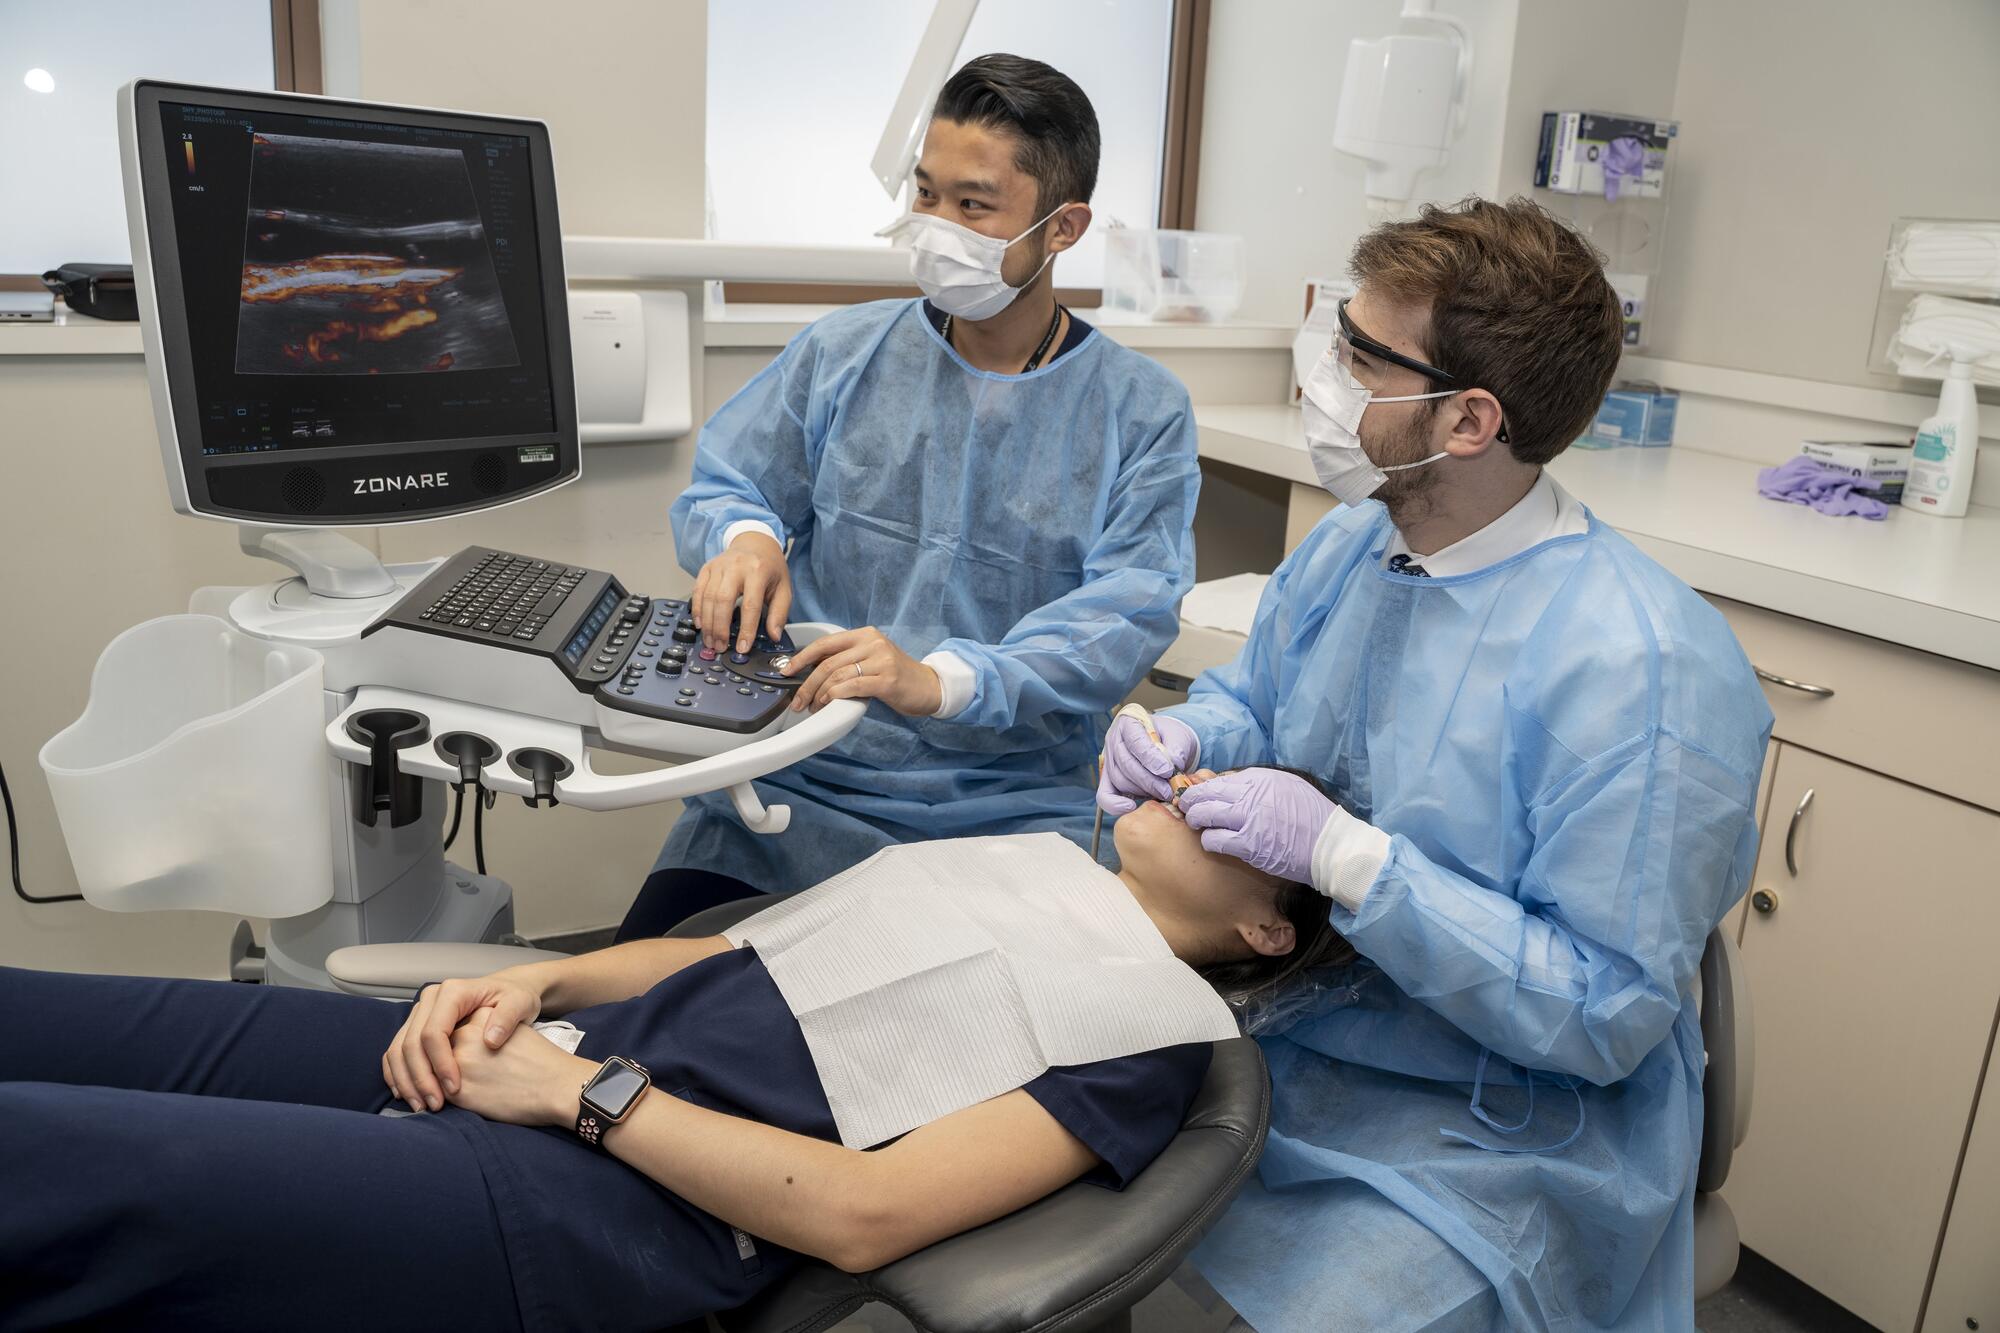 Two dentists wearing blue scrubs working on patients mouth and looking at an ultrasound